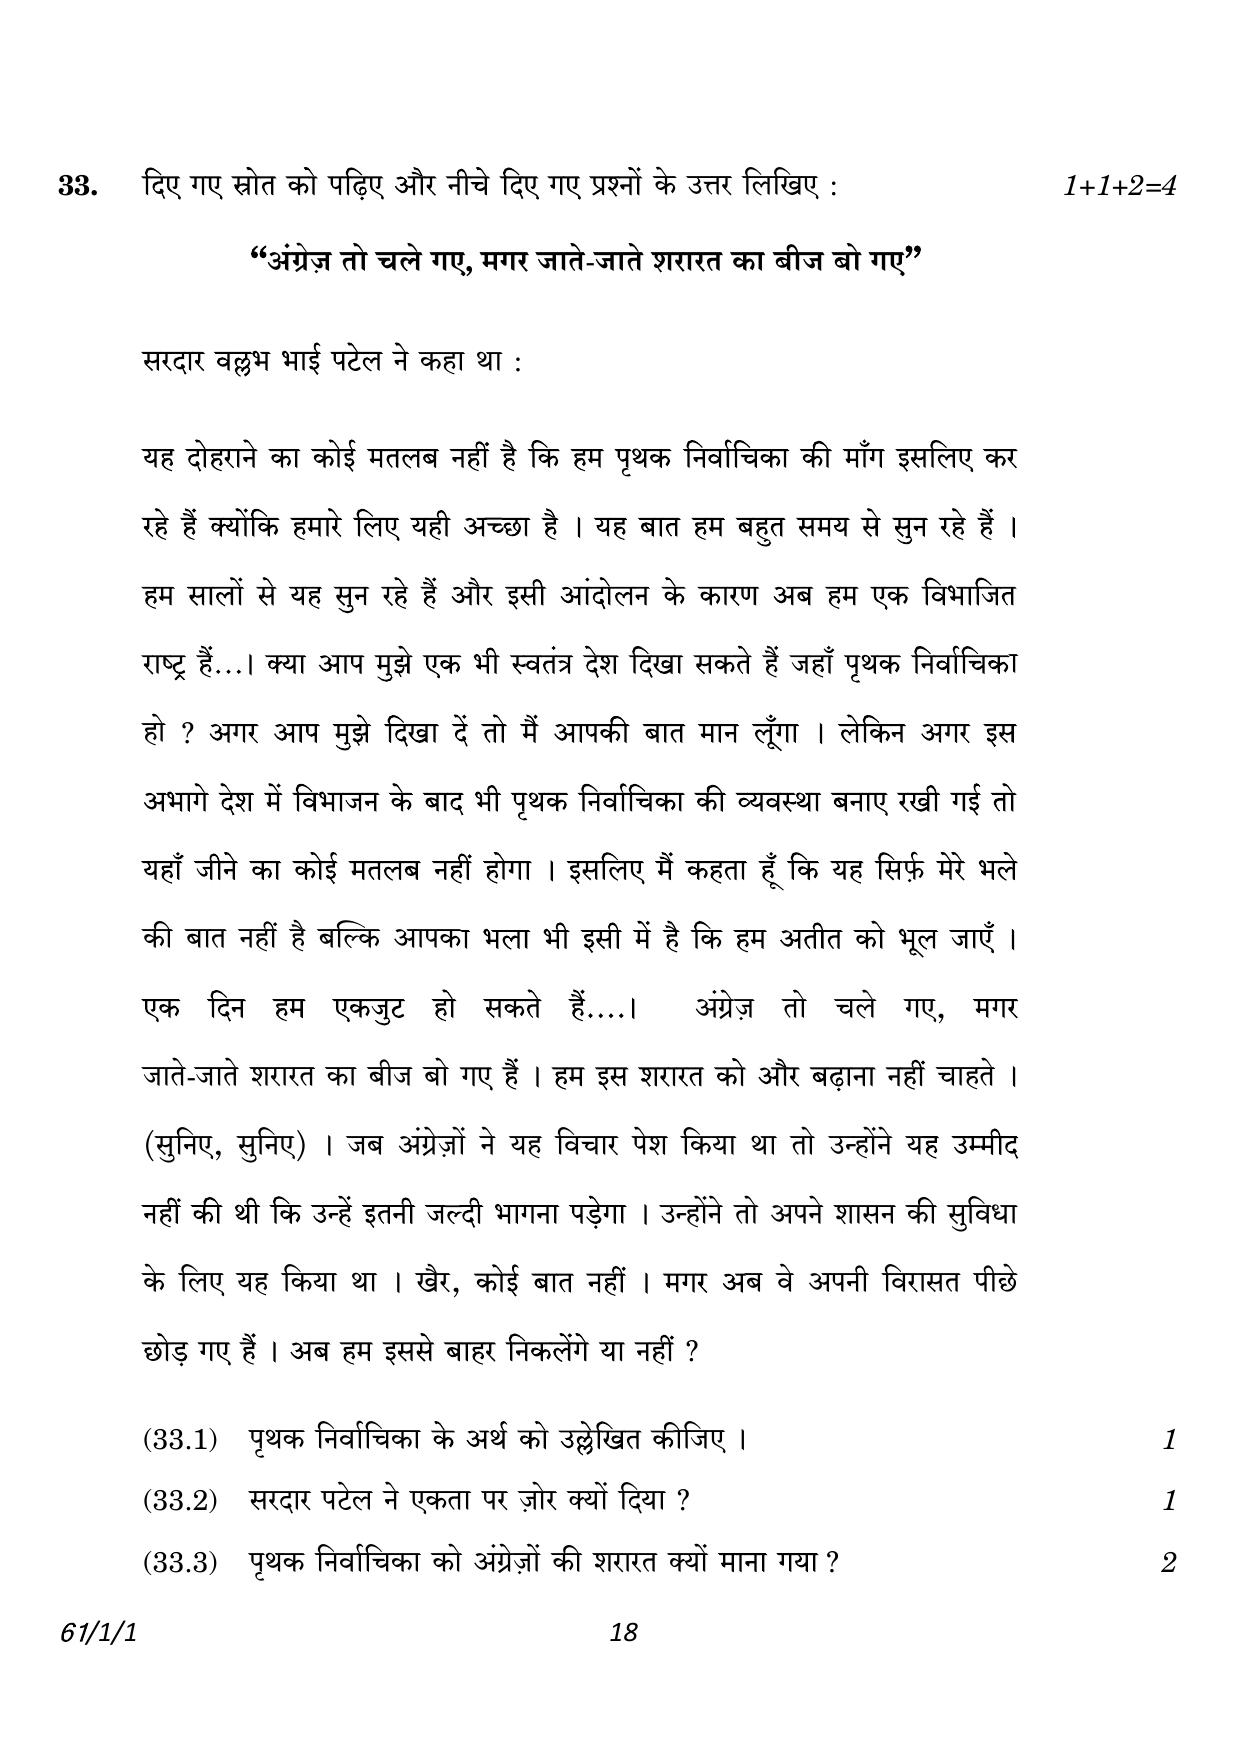 CBSE Class 12 61-1-1 History 2023 Question Paper - Page 18